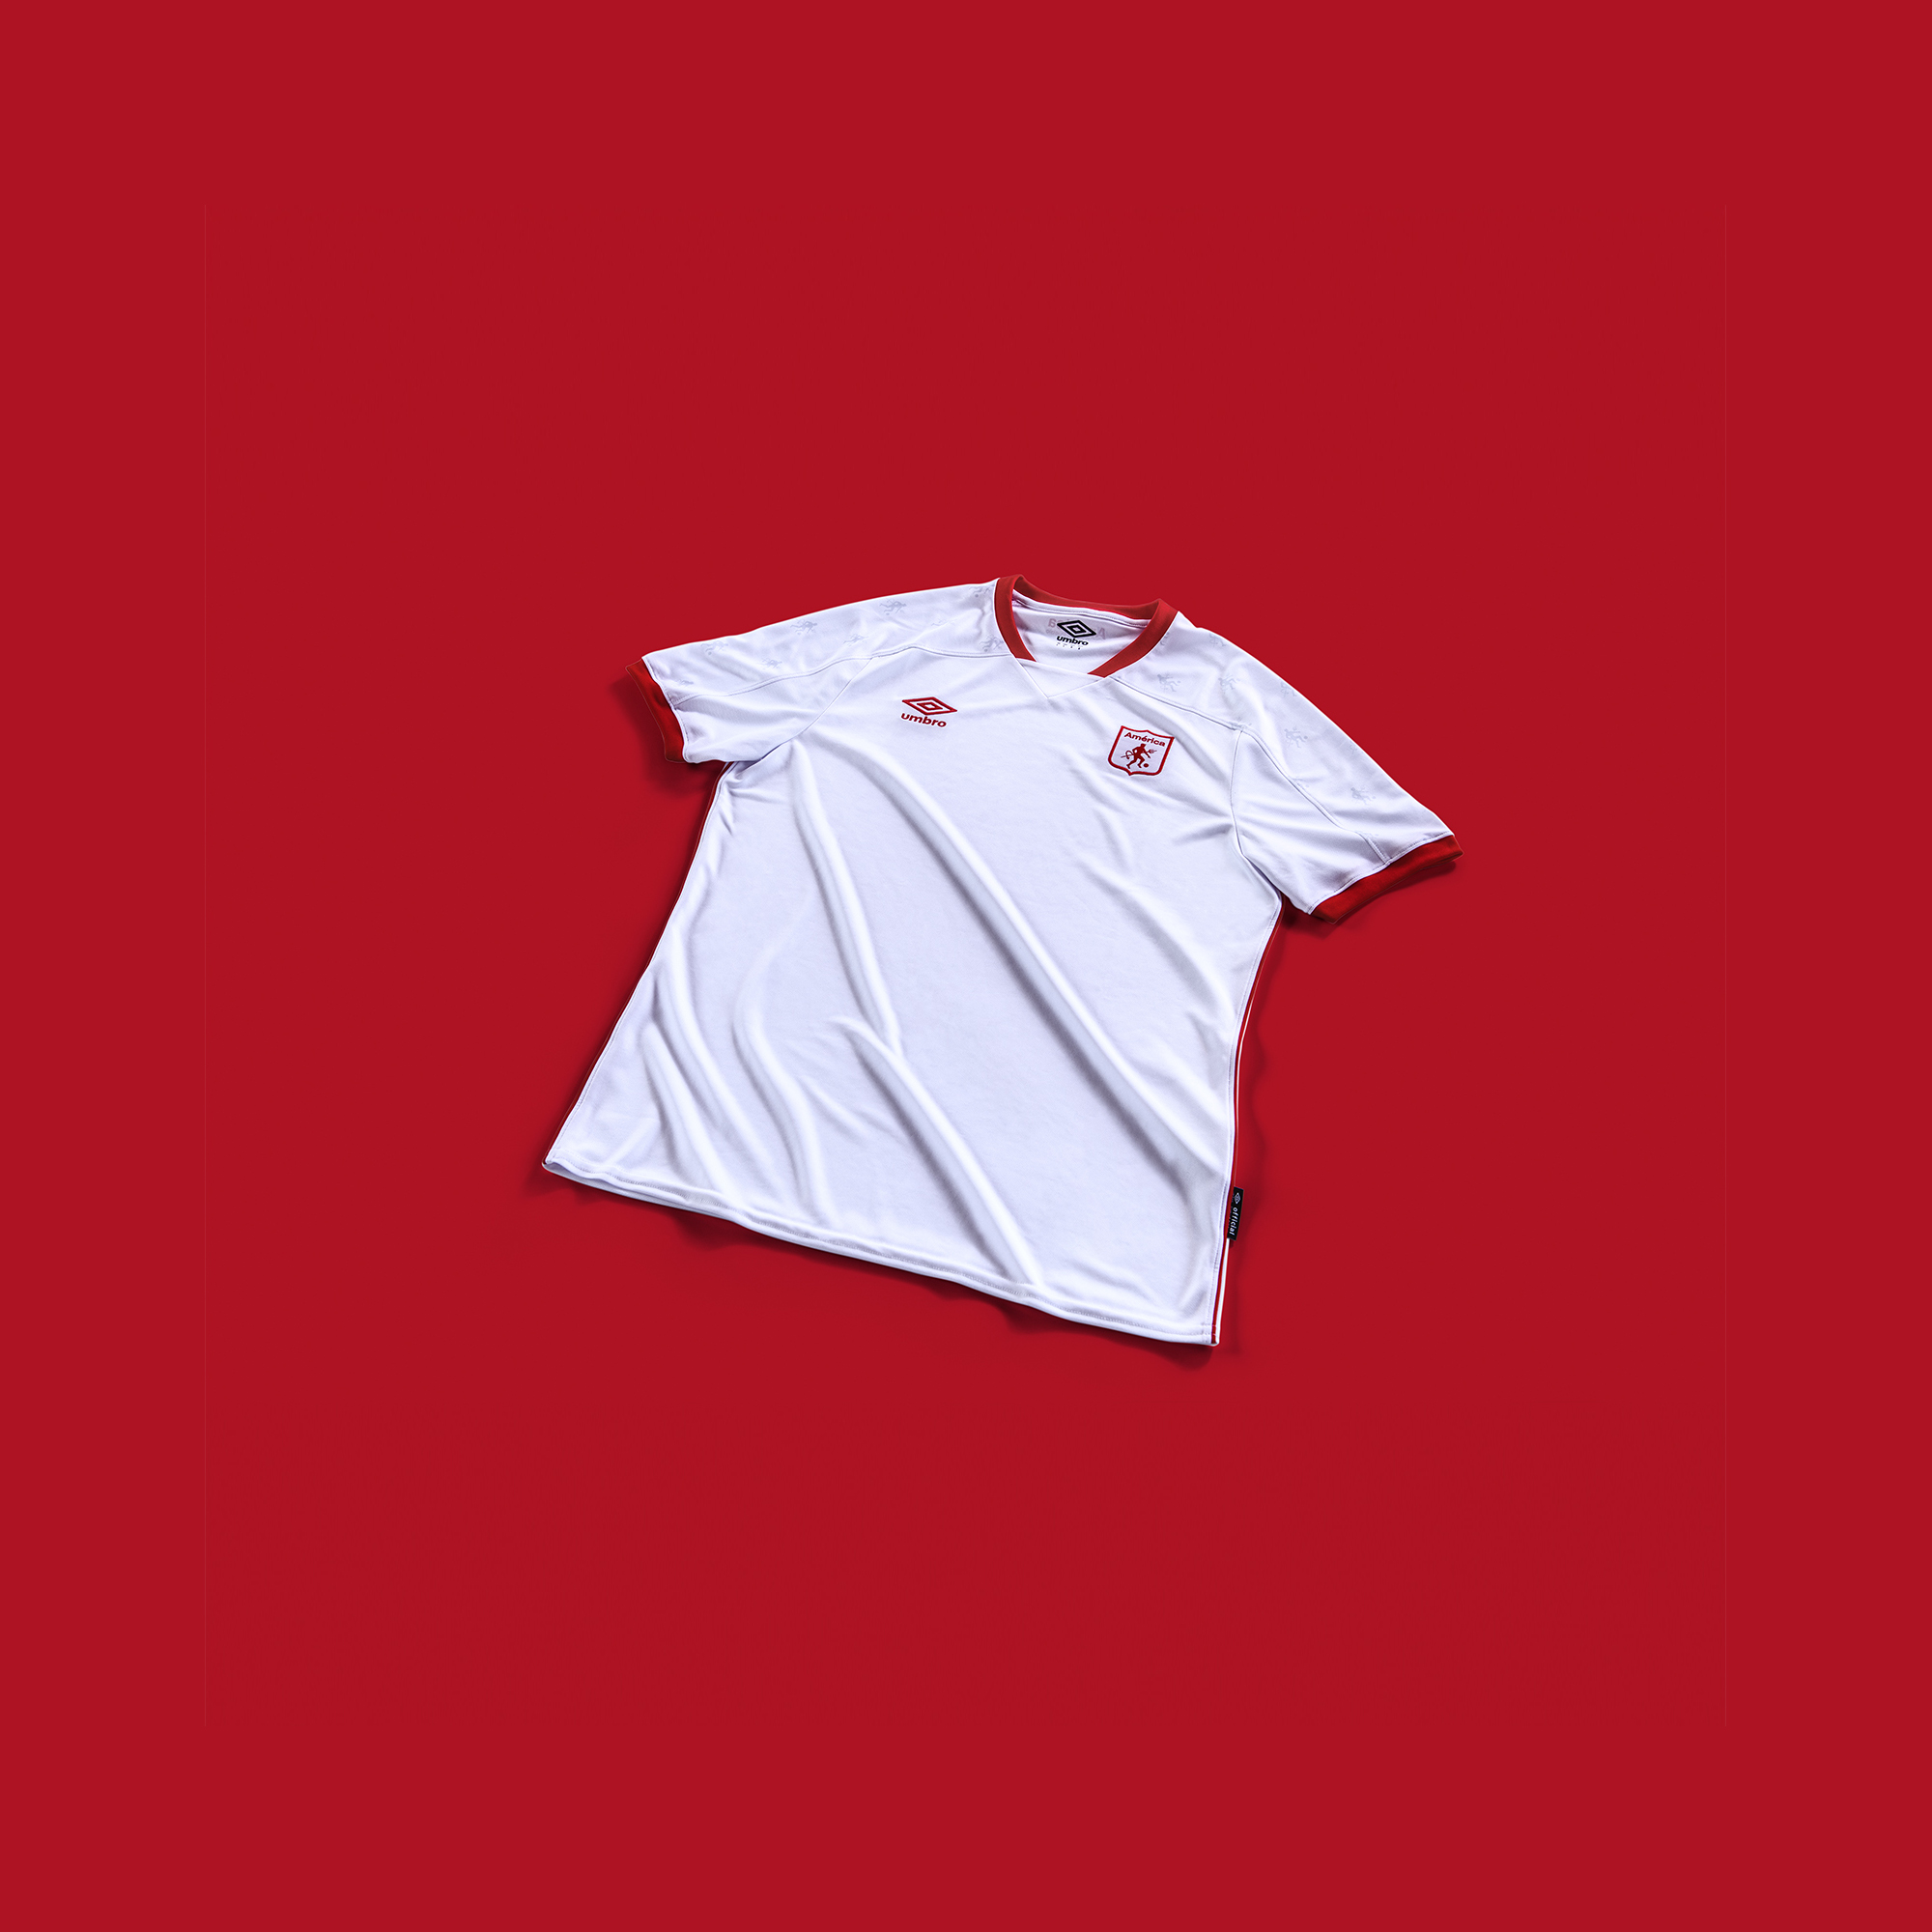 Sizes Available M Cali Colombia America De cali Soccer Jersey 